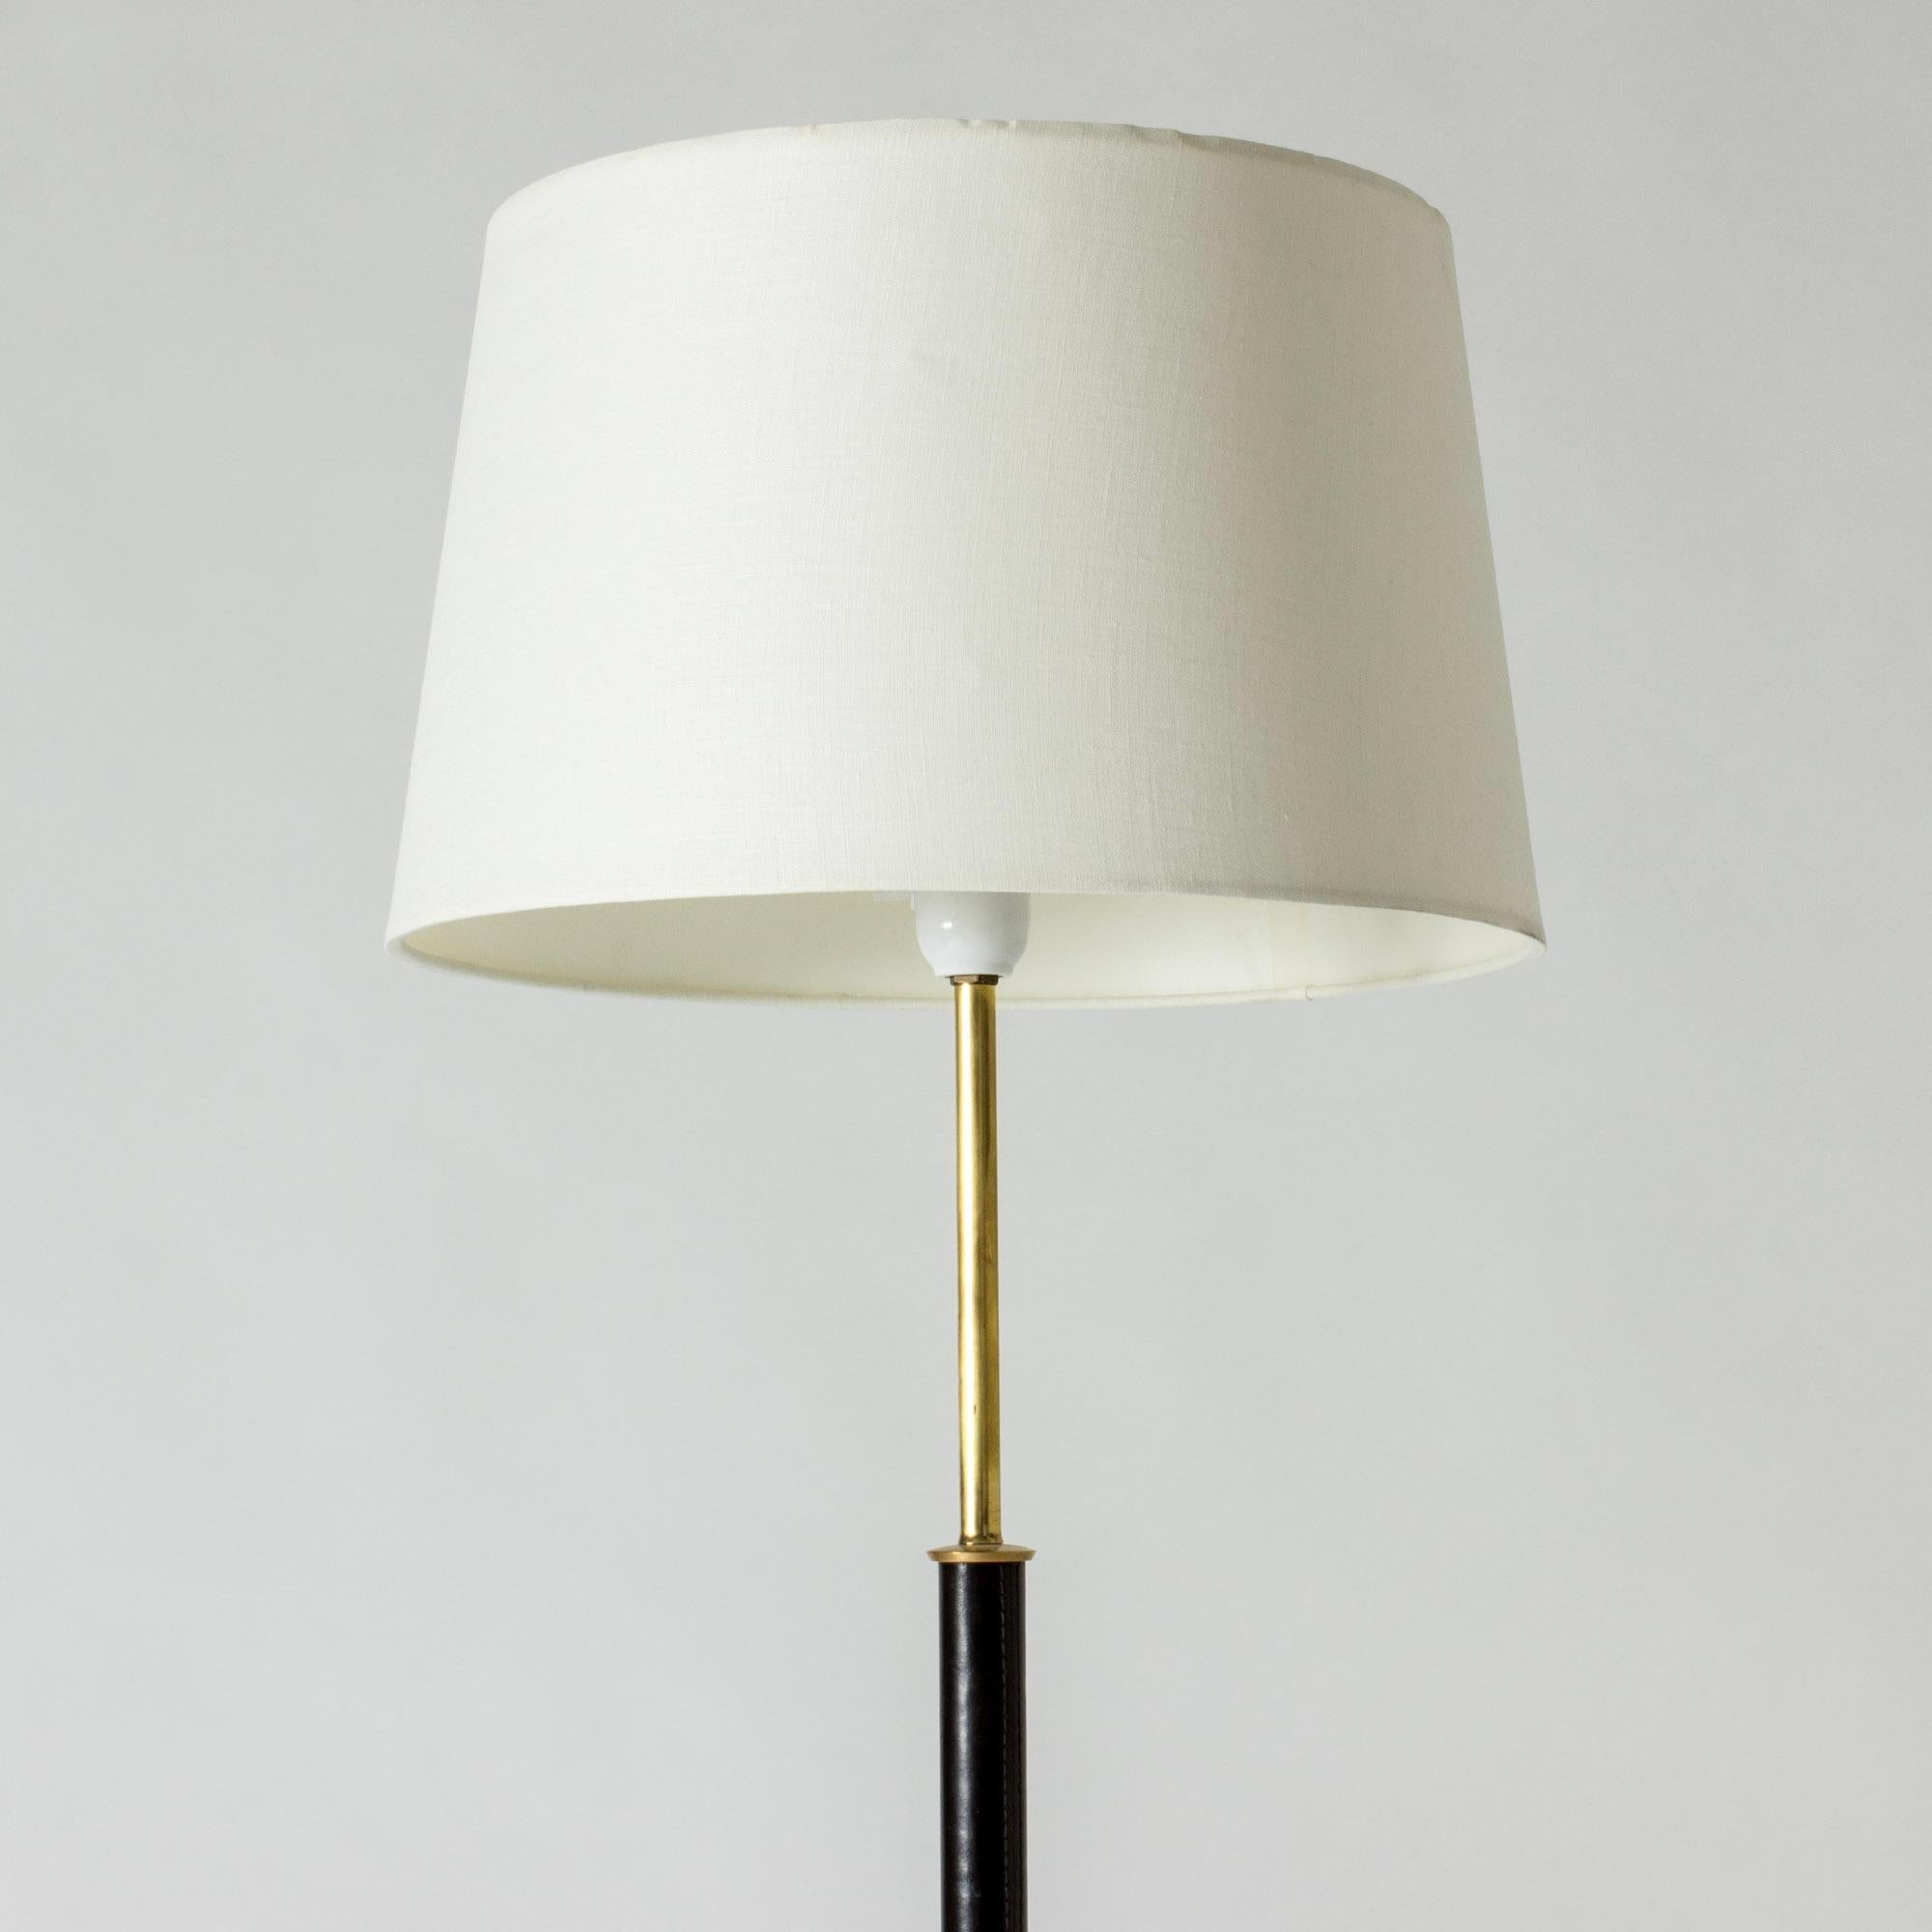 Elegant midcentury floor lamp, made from brass with a leather dressed stem. Black lacquered base.